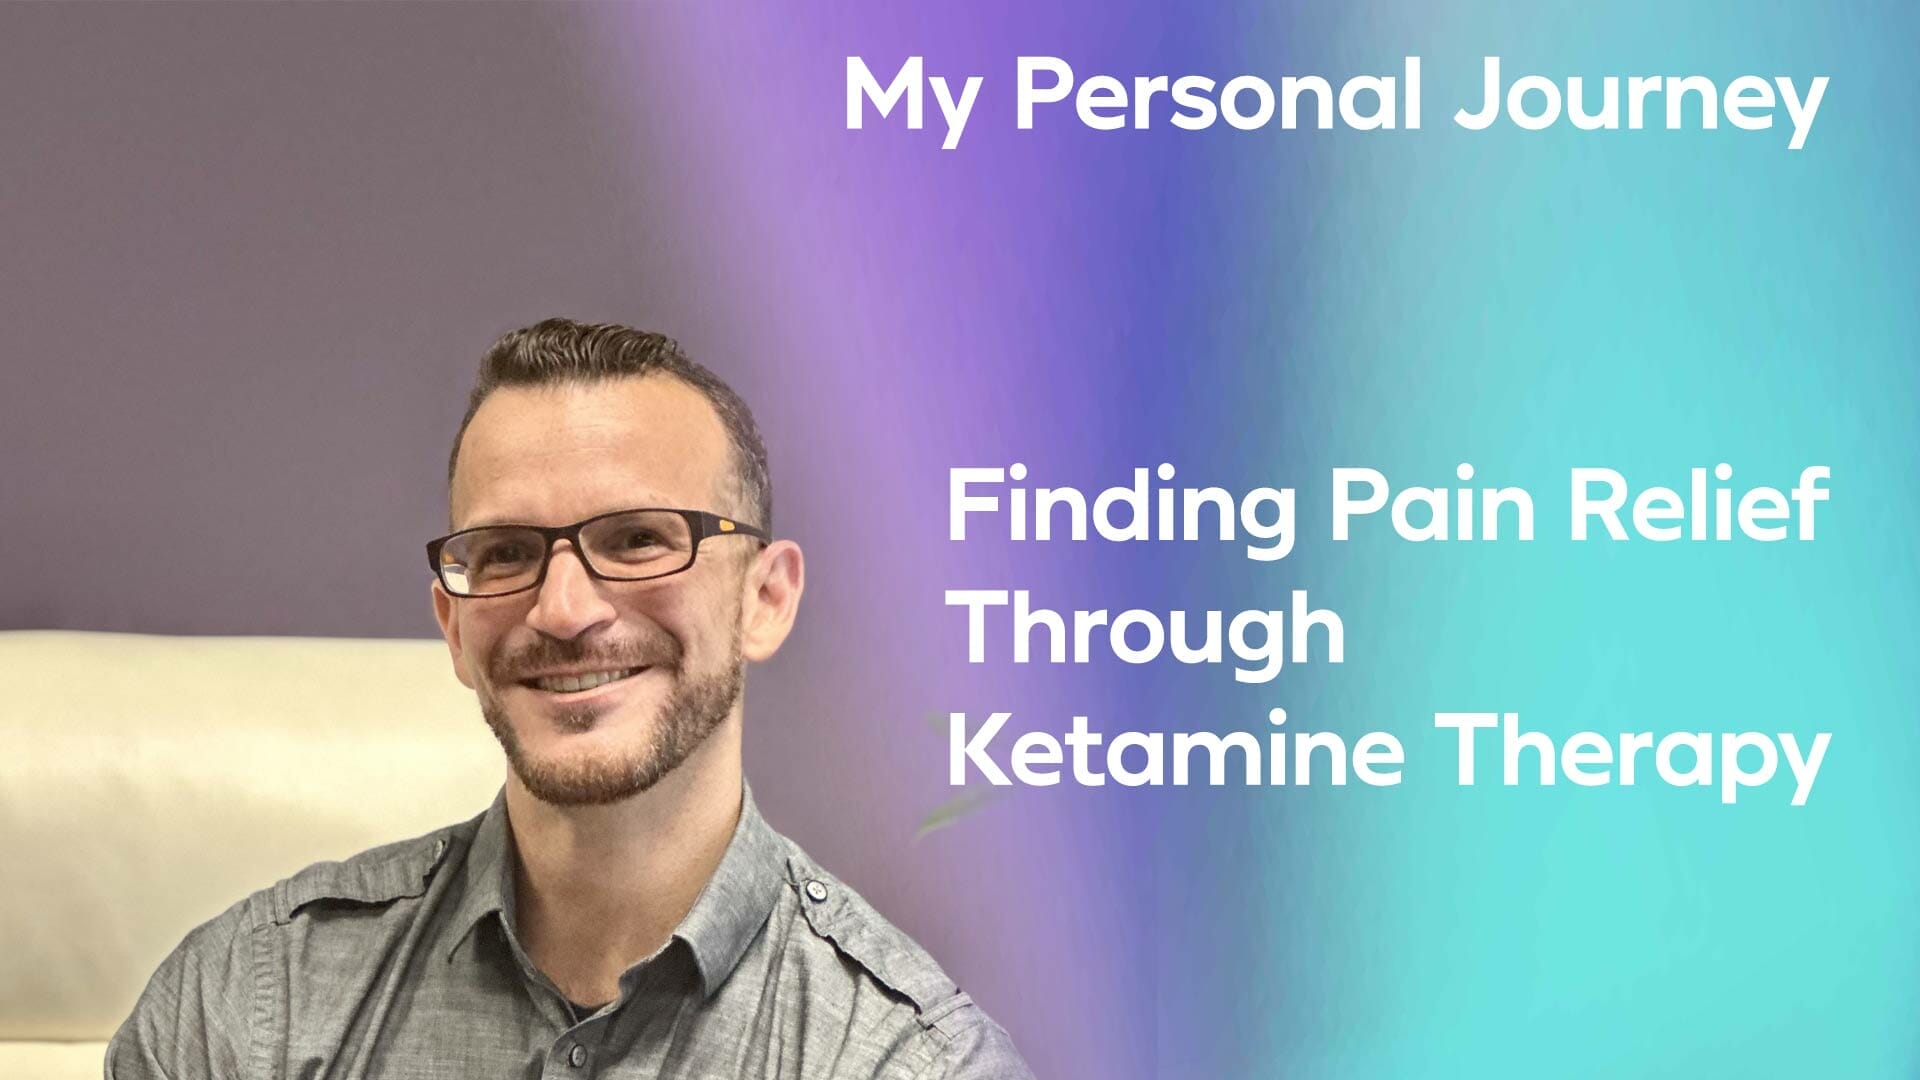 My Personal Journey Finding Pain Relief Through Ketamine Therapy